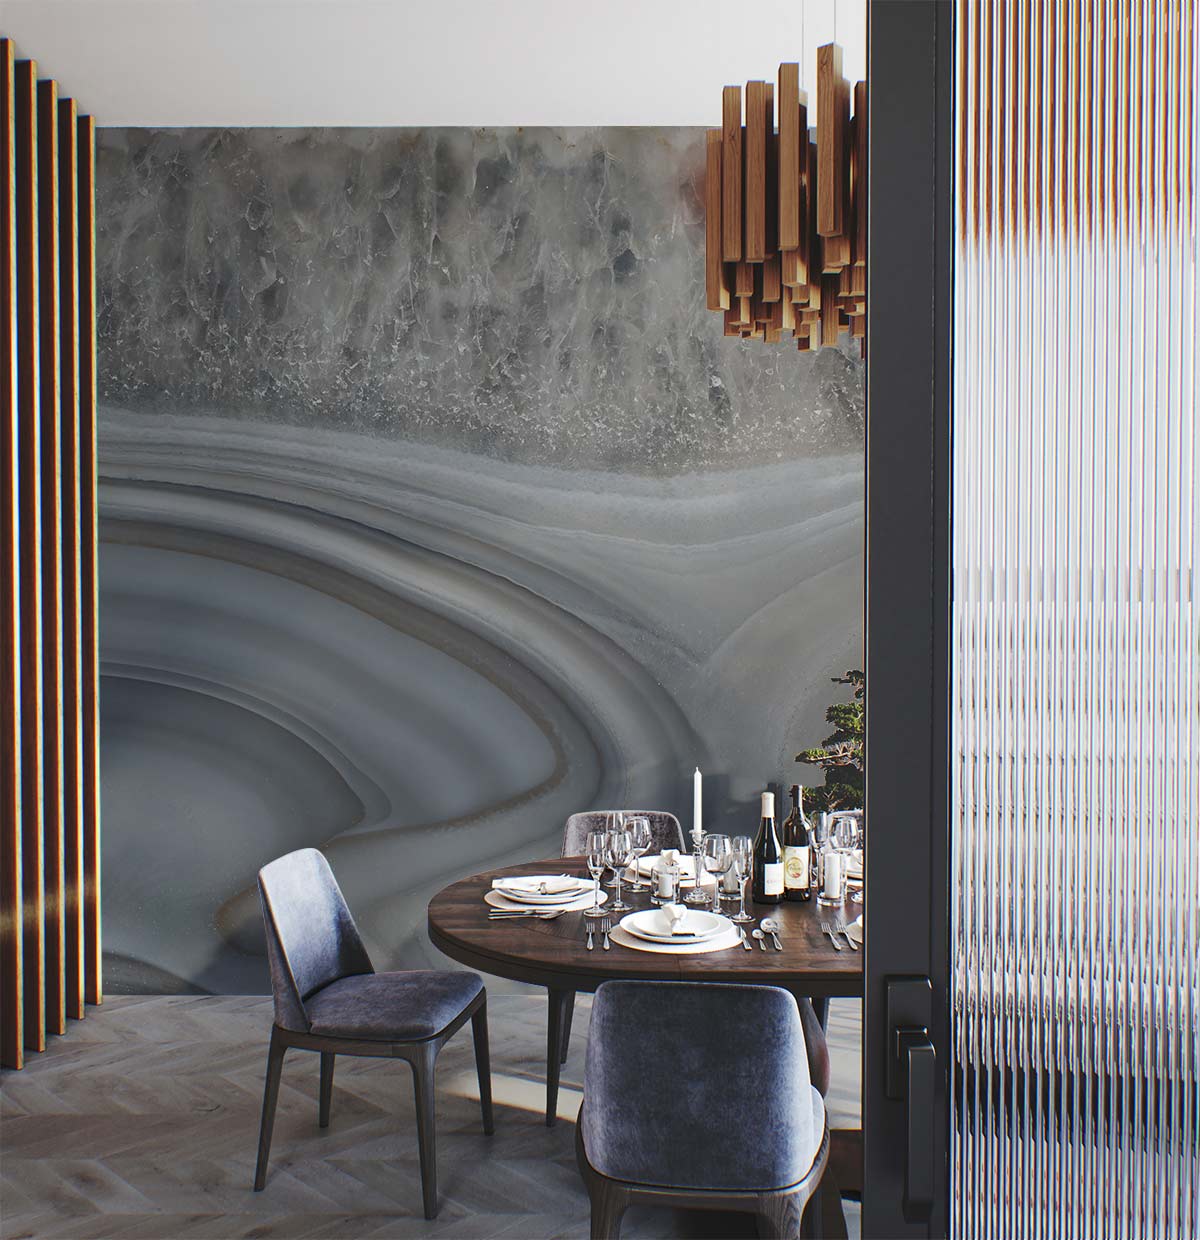 Wallpaper Mural in the Living Room Featuring a Ripple Gray Marble Design